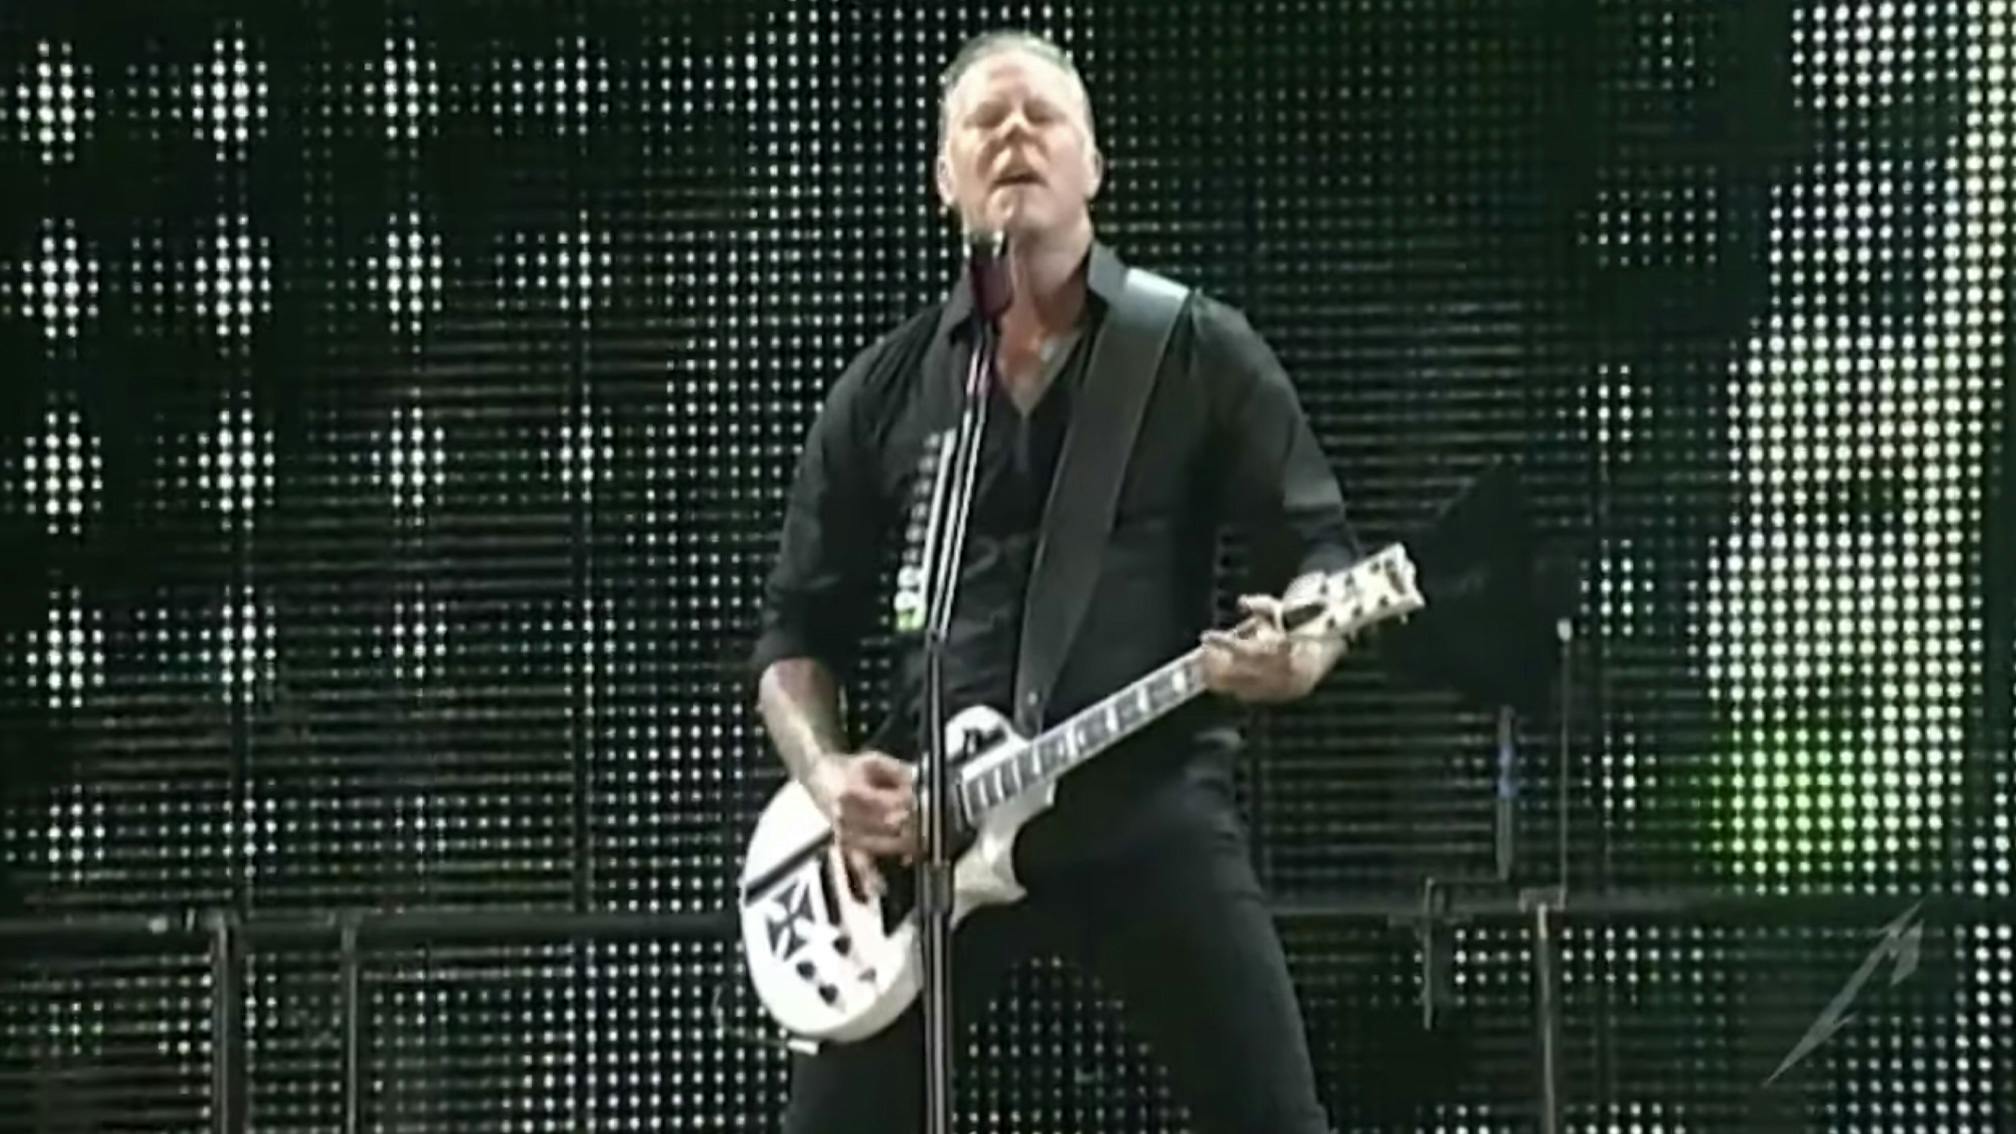 Watch Metallica Play One Of Their "Most Unique And Hands-Down Coolest Setlists In Recent Memory"